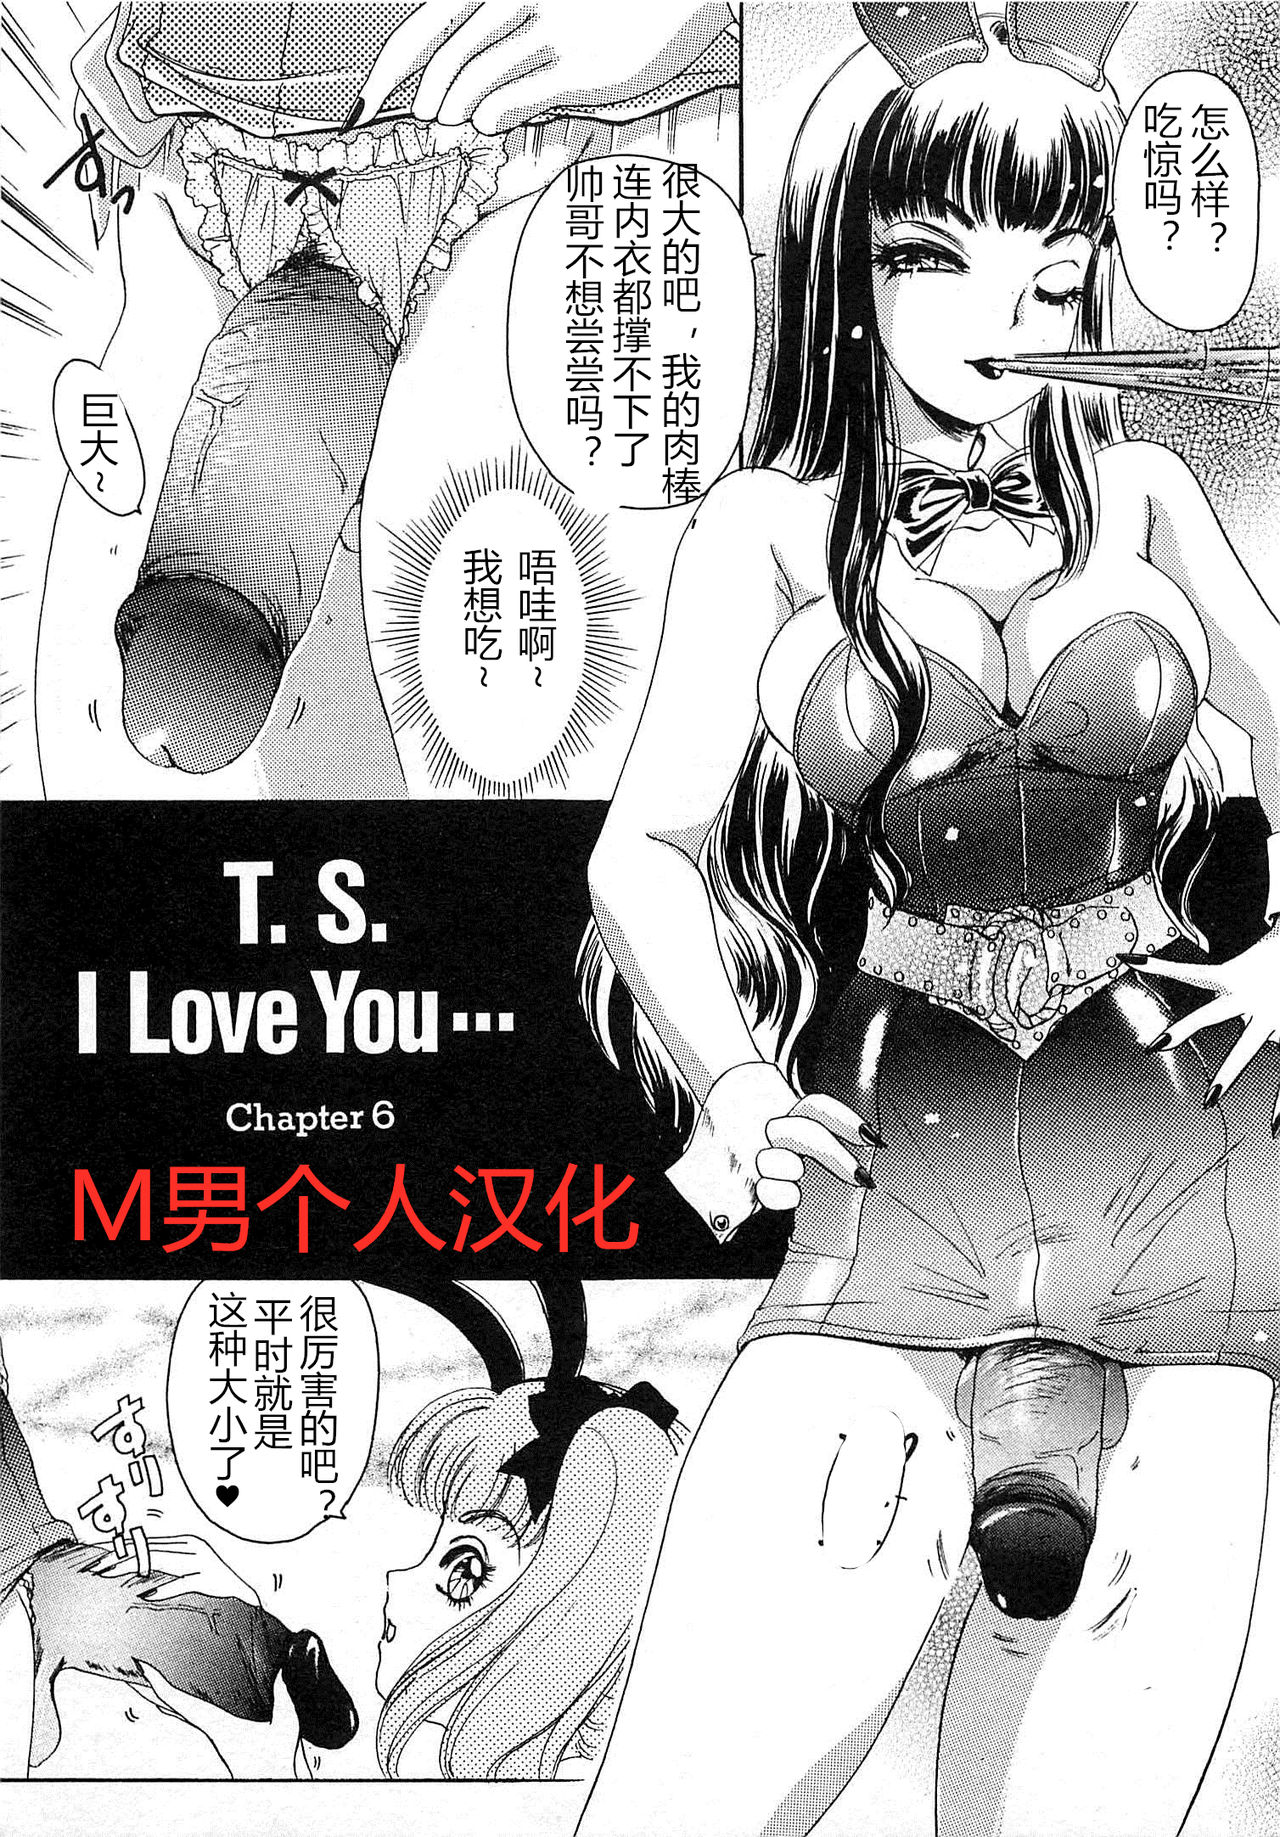 [The Amanoja9] T.S. I LOVE YOU chapter 06 [Chinese] [M男个人汉化] [The Amanoja9] T.S. I LOVE YOU chapter 06 [中国翻訳]